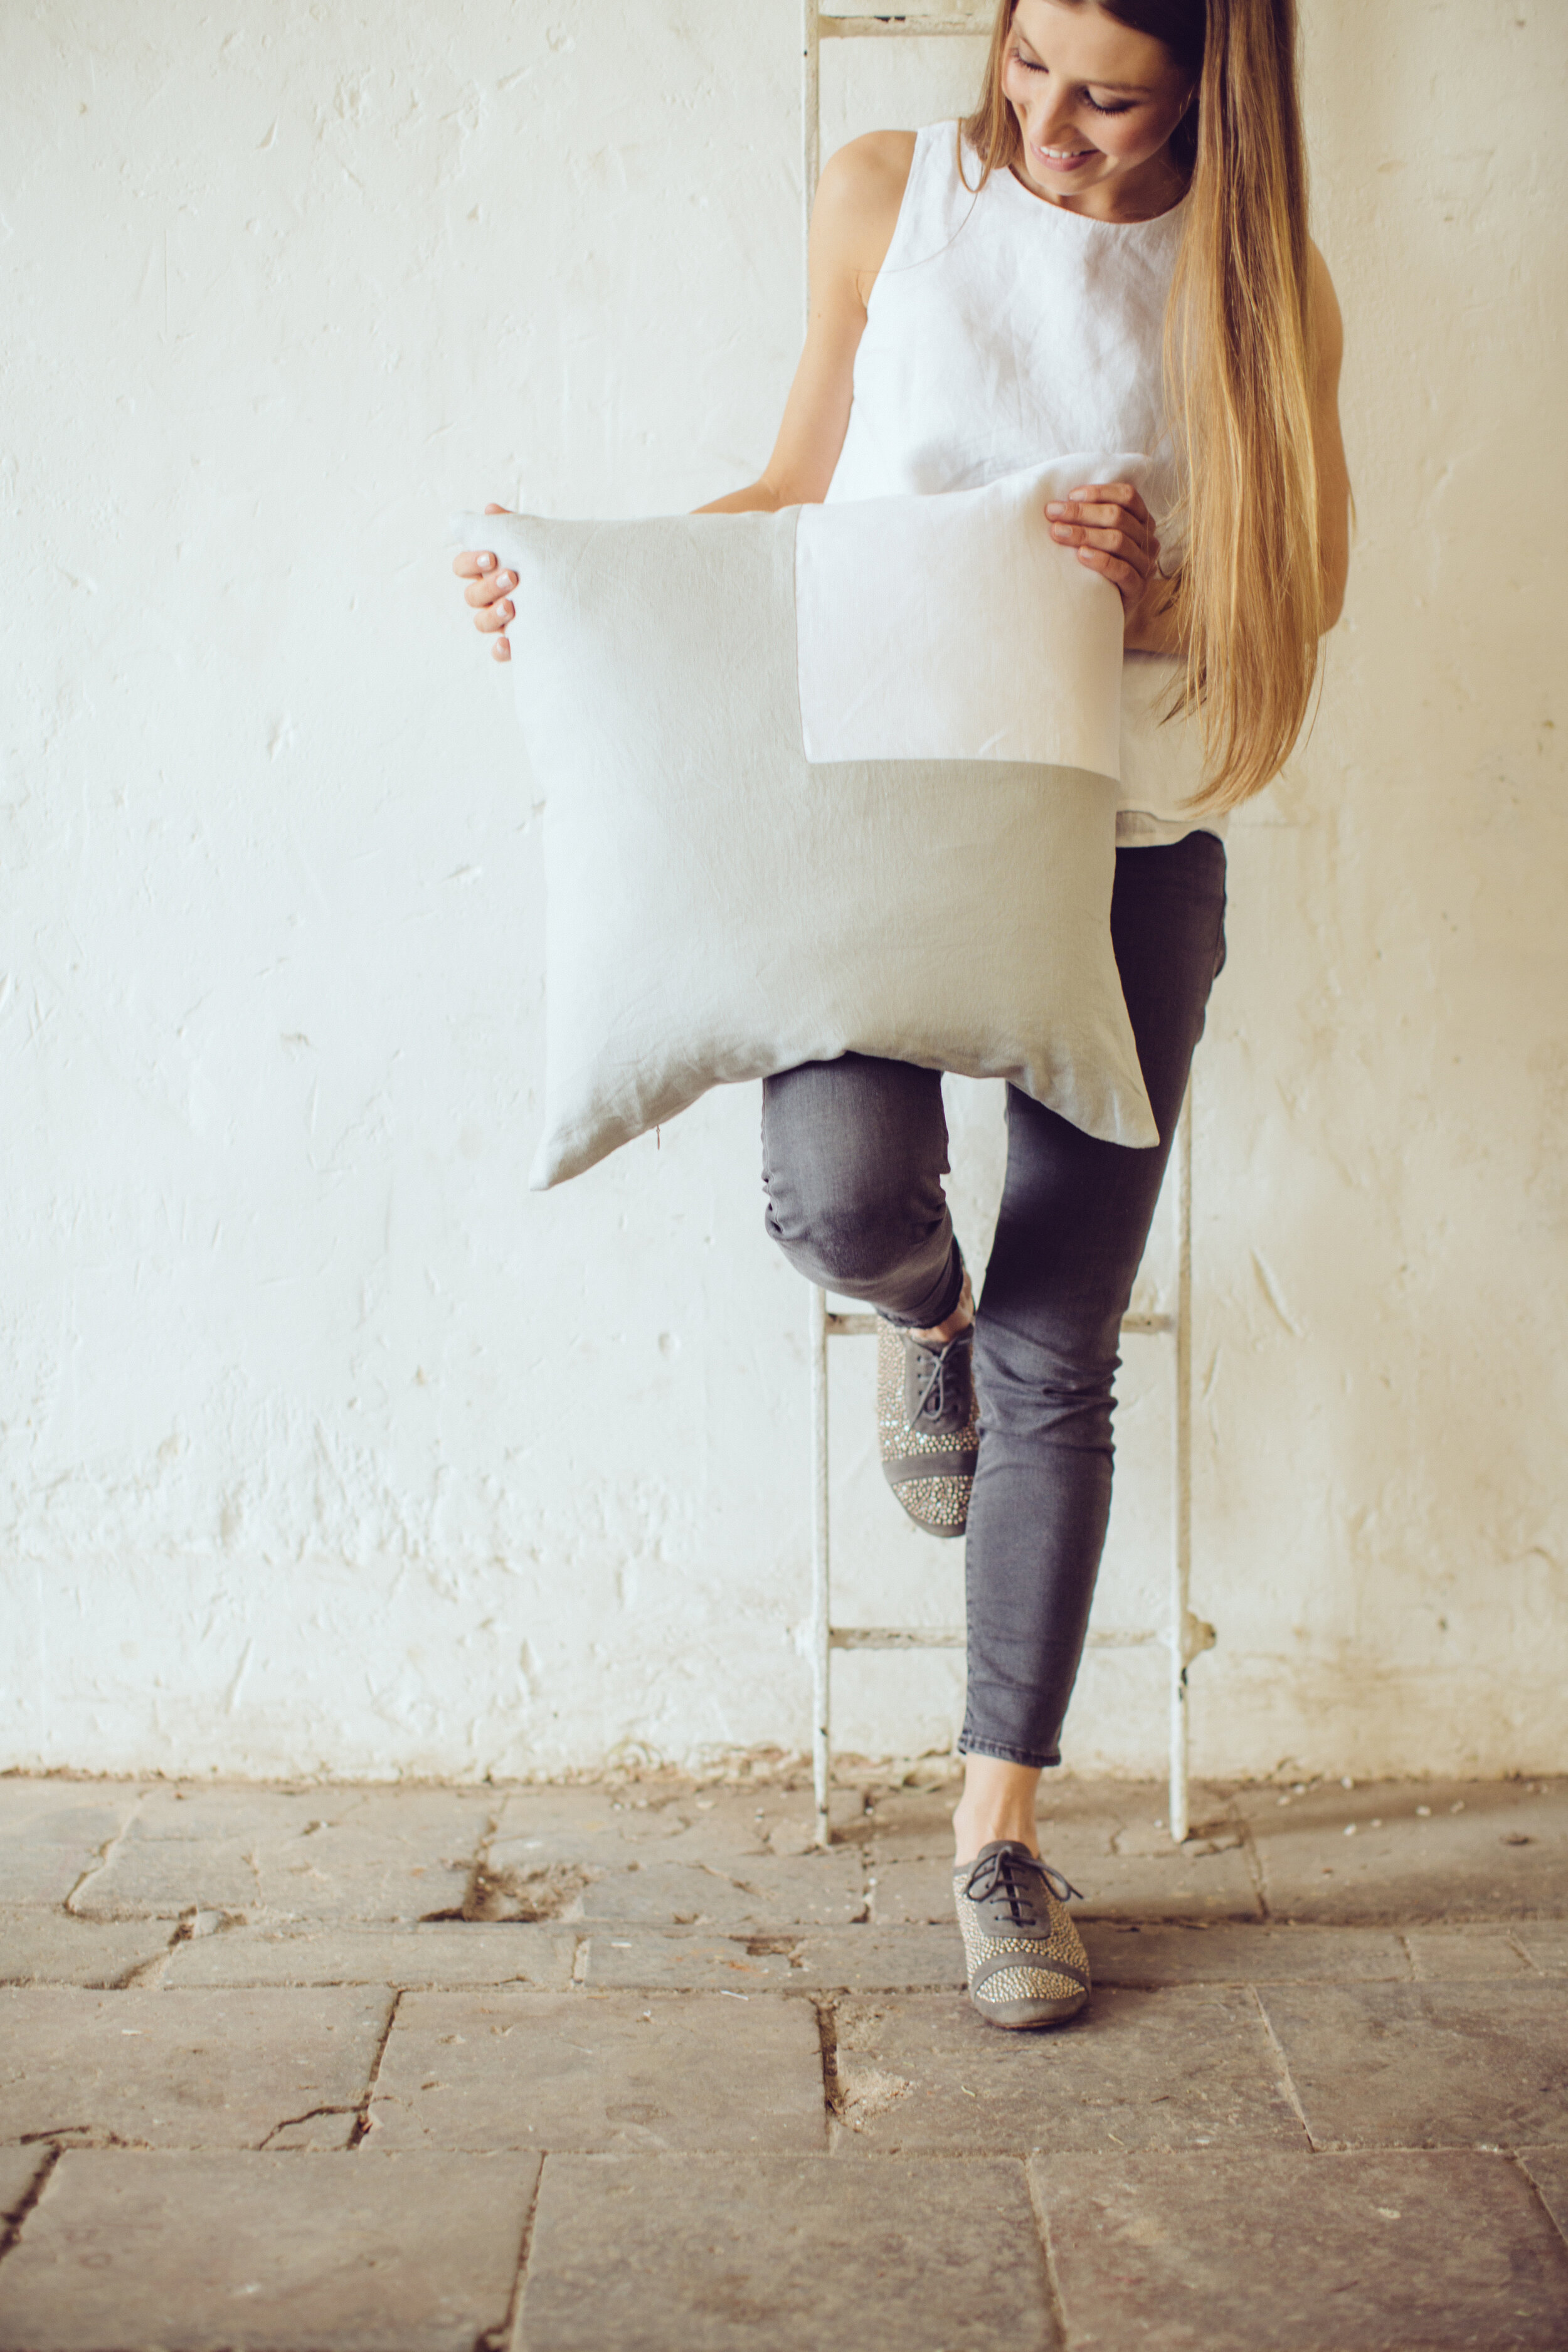 Katie Larmour Handcrafted Irish Linen Couture Cushions by designer maker Katie Larmour contemporary patchwork .jpg